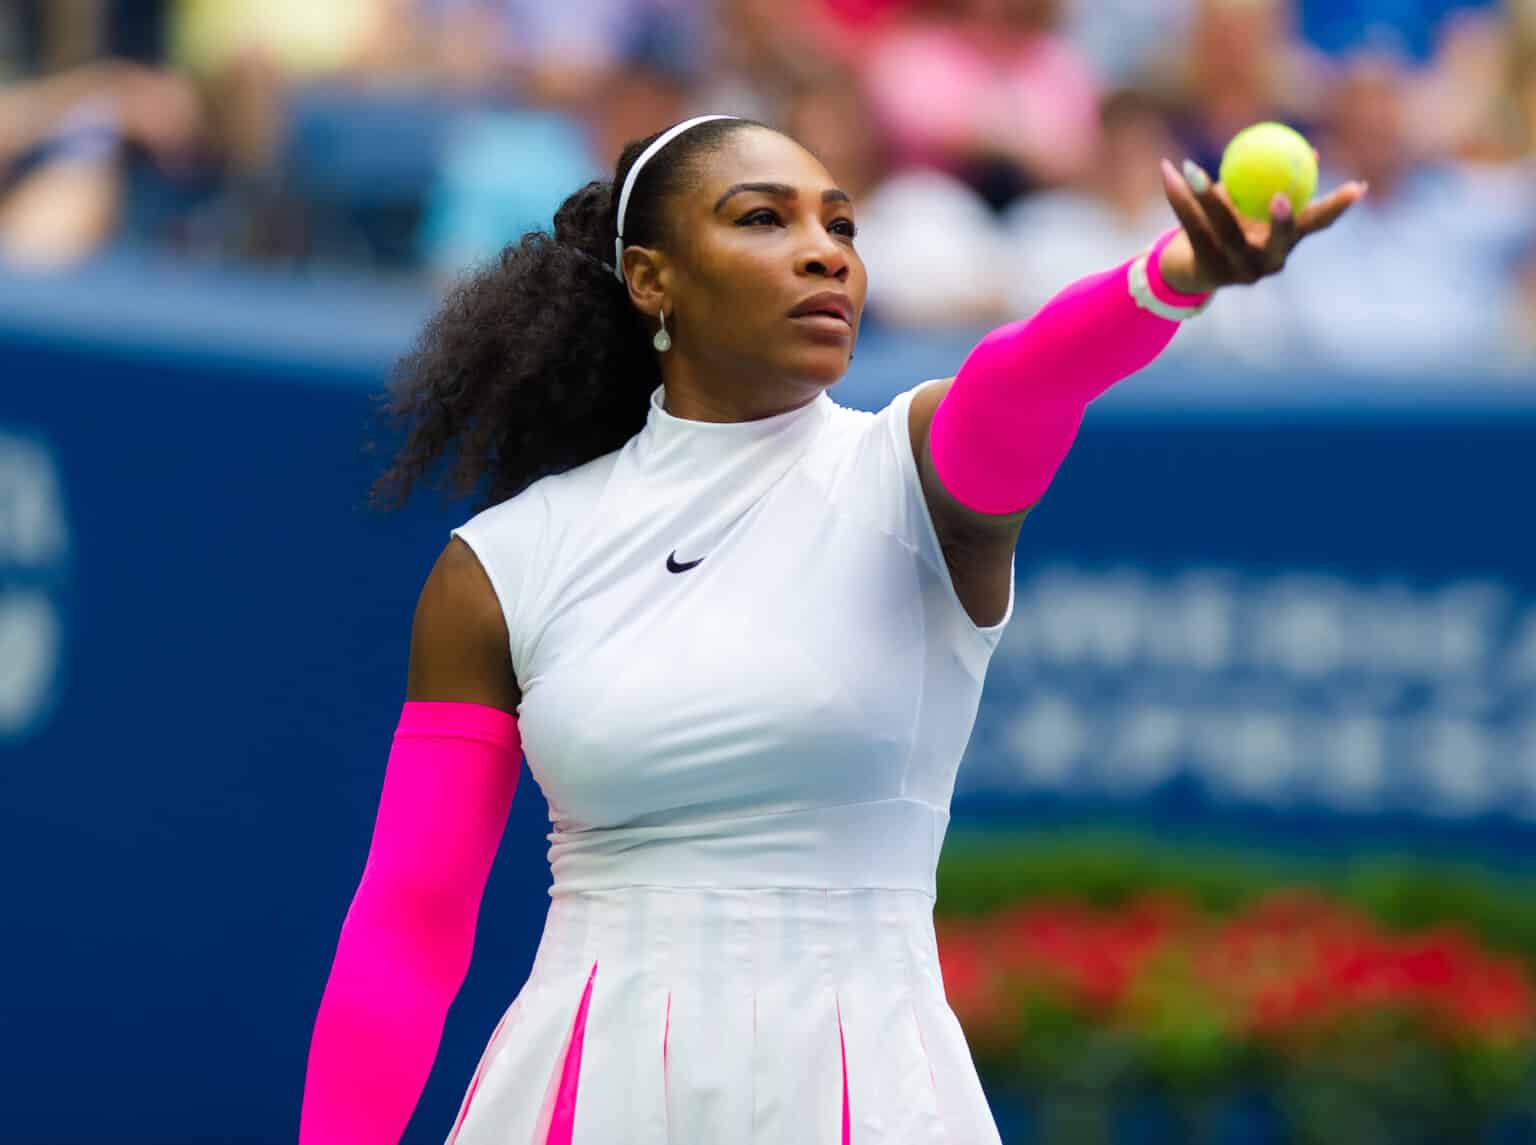 What High School Did Serena Williams Go To?